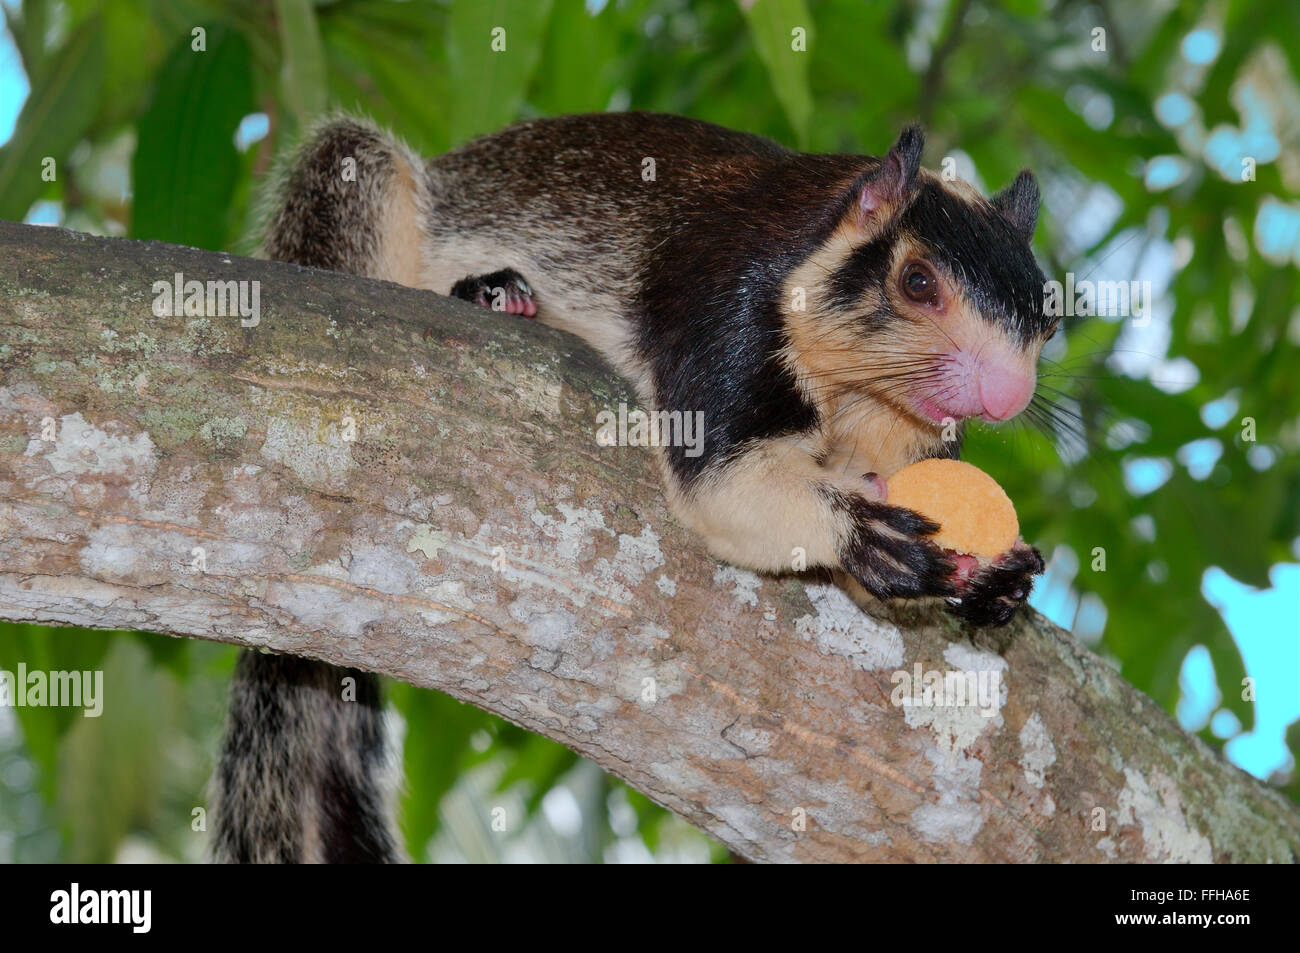 Indian giant squirrel or Malabar giant squirrel (Ratufa indica) He is sitting on a branch and holds in paws cookies, Hikkaduwa,  Stock Photo